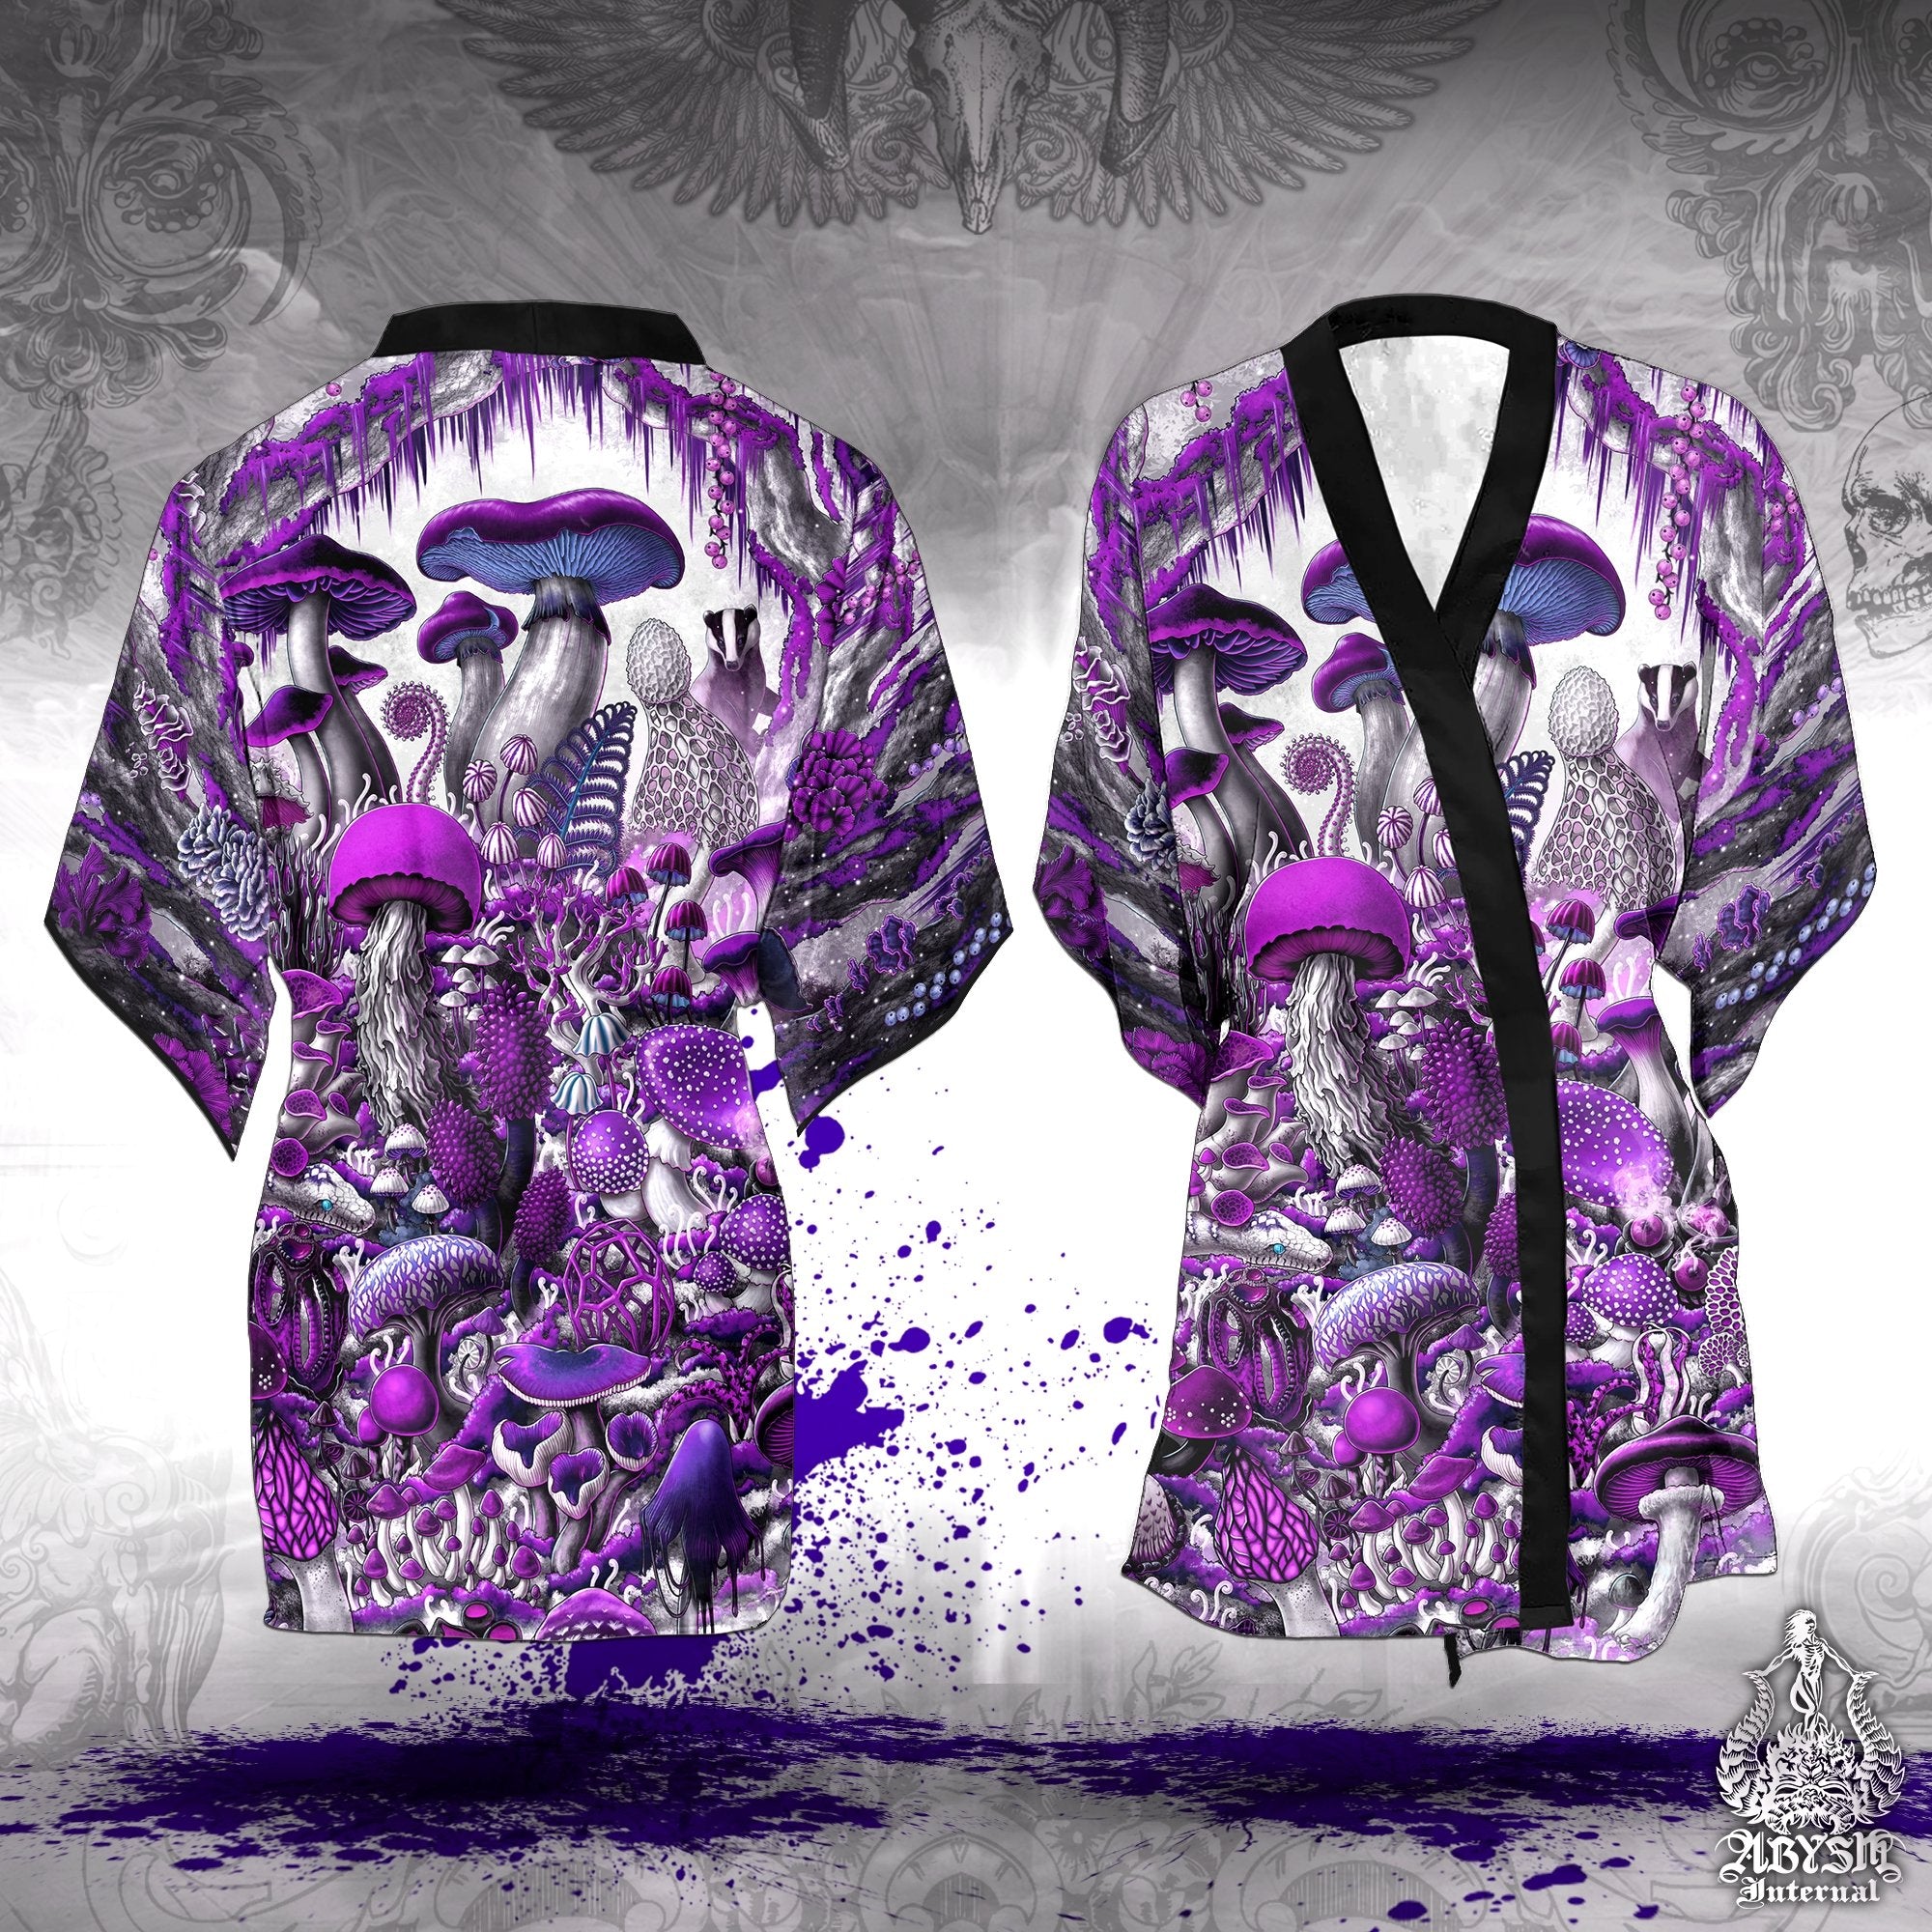 Mushrooms Cover Up, White Goth Outfit, Indie Party Kimono, Summer Festival Robe, Mycology Art, Biology Gift, Alternative Clothing, Unisex - Purple - Abysm Internal